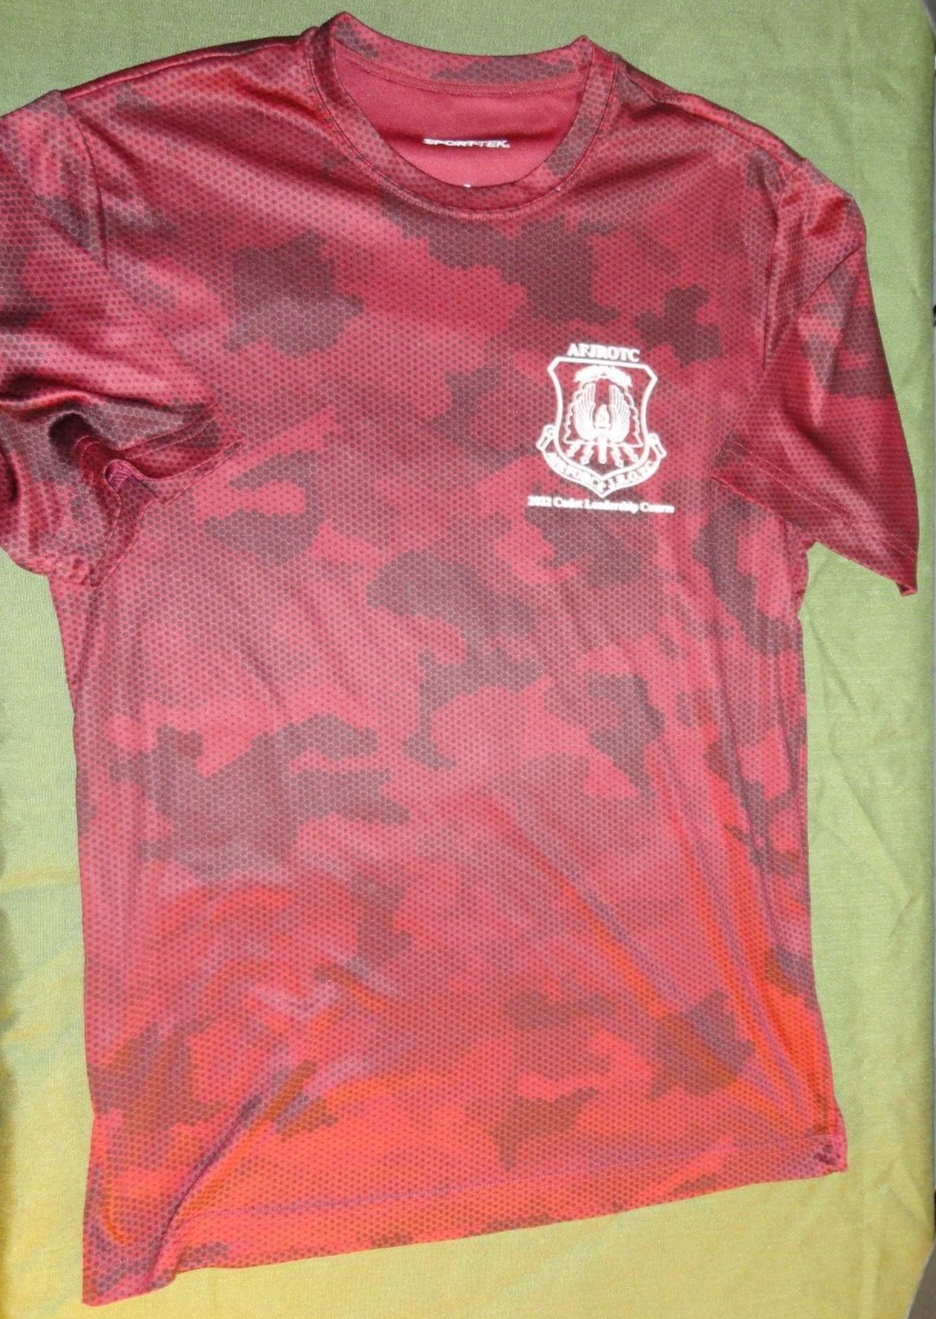 DISCONTINUED AFJROTC AIR FORCE 2022 CADET LEADERSHIP COURSE RED CAMO SHIRT SMALL - $26.72